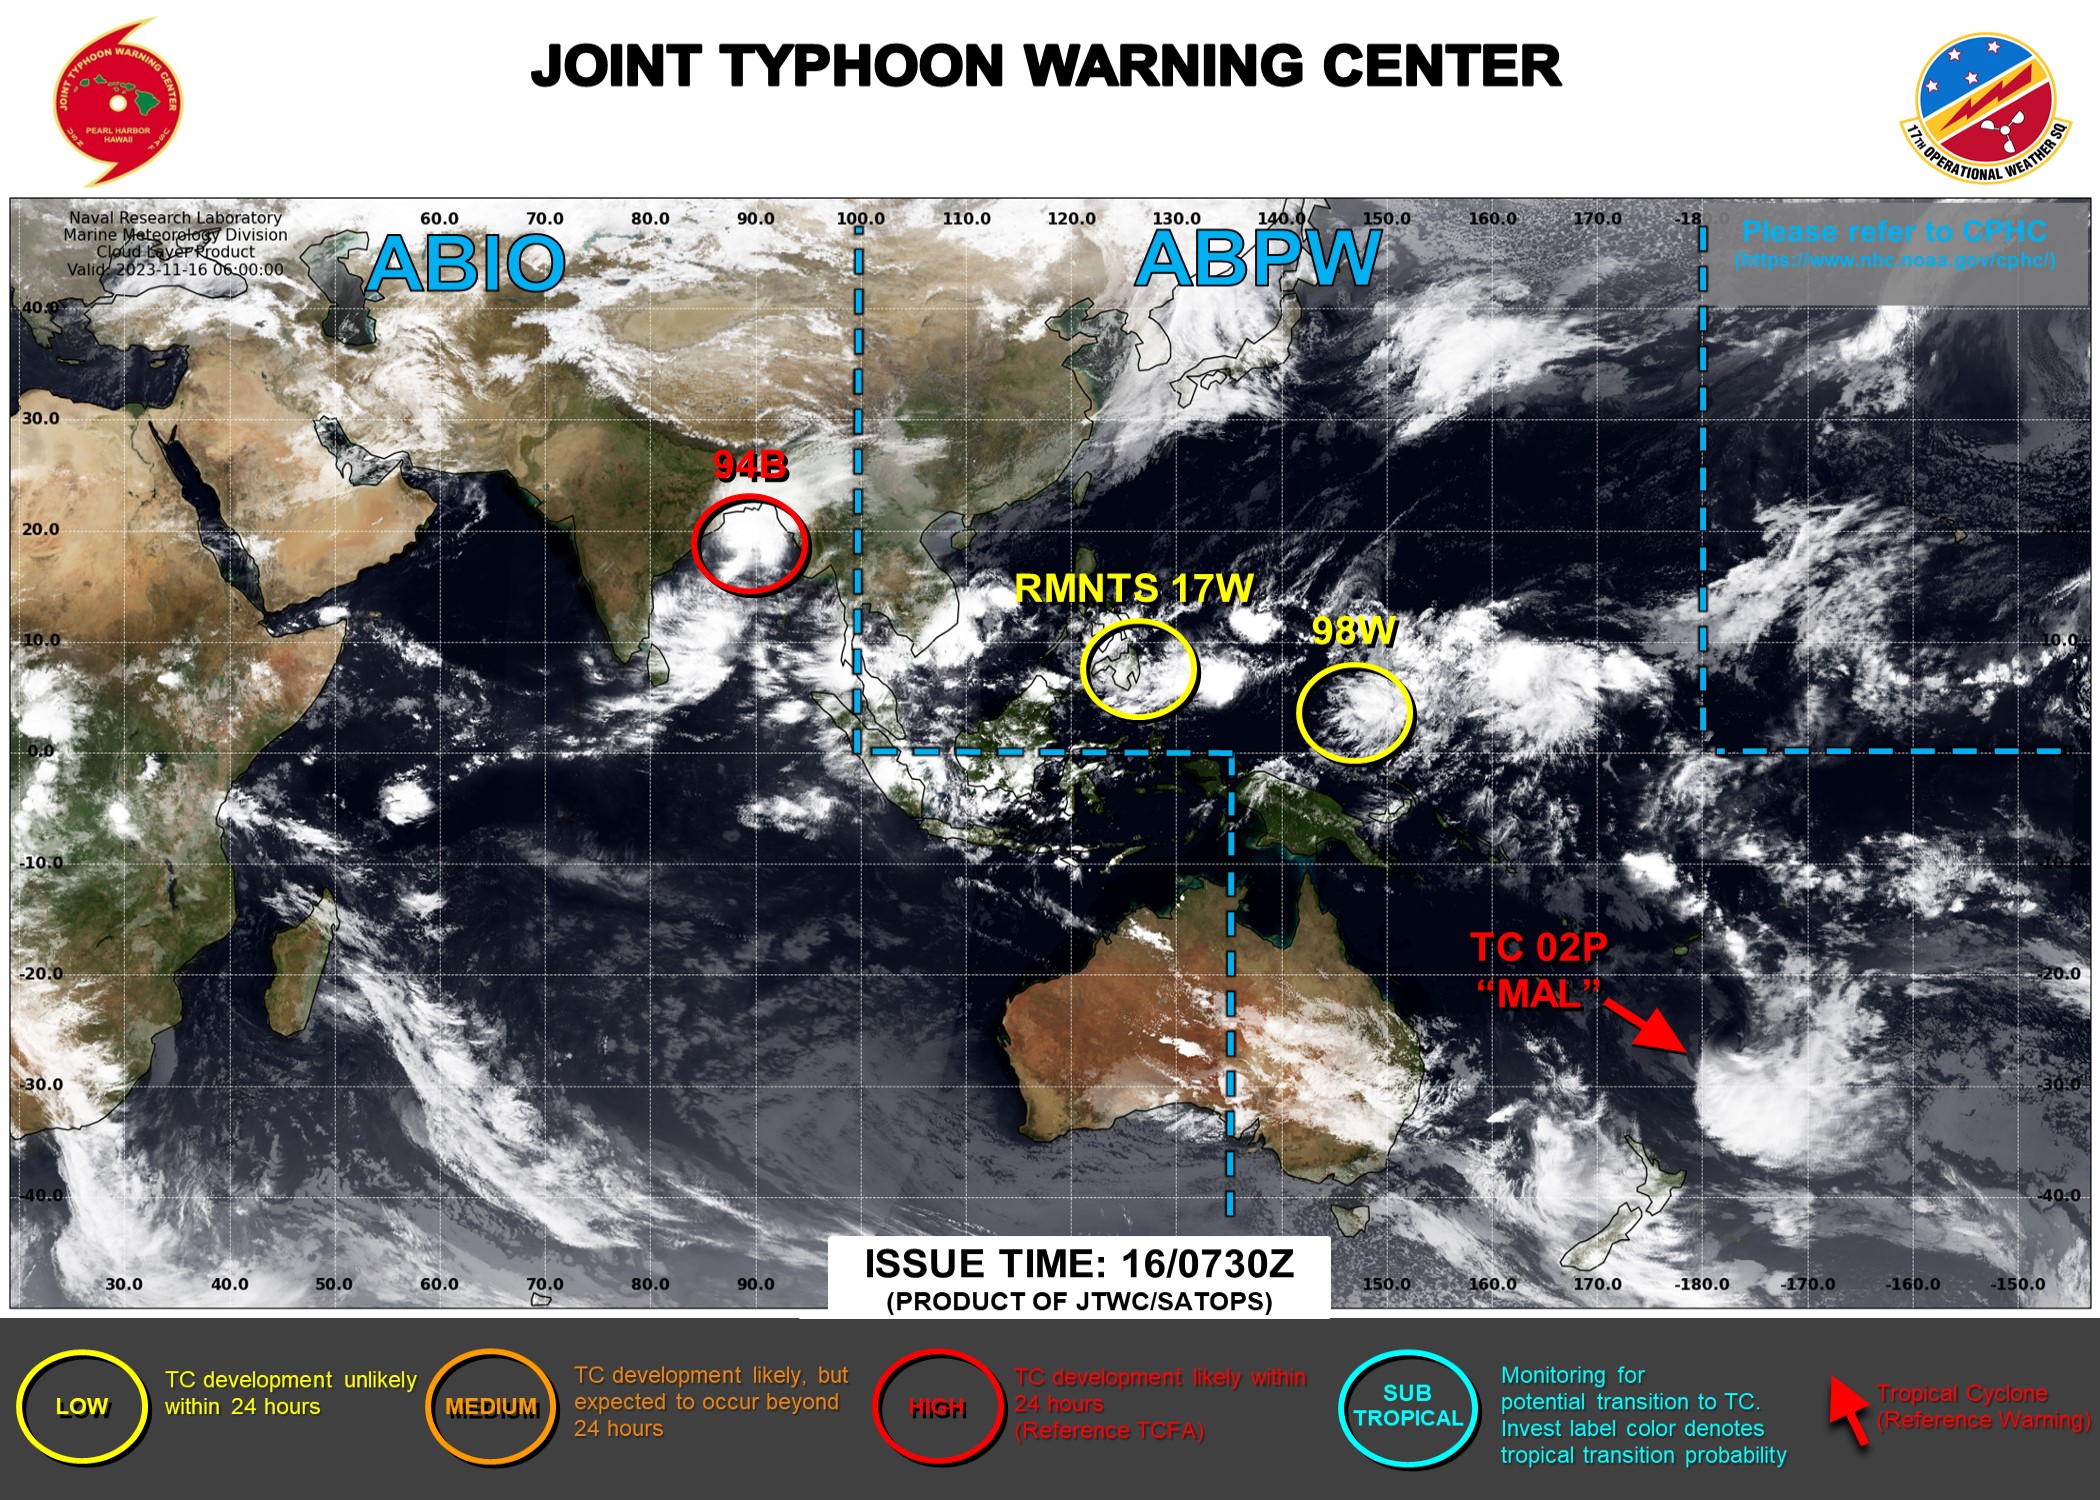 JTWC IS ISSUING 3HOURLY WARNINGS ON INVEST 94B AND THE REMNANTS OF TC 02P(MAL) AND THE REMNANTS OF TD 17W.